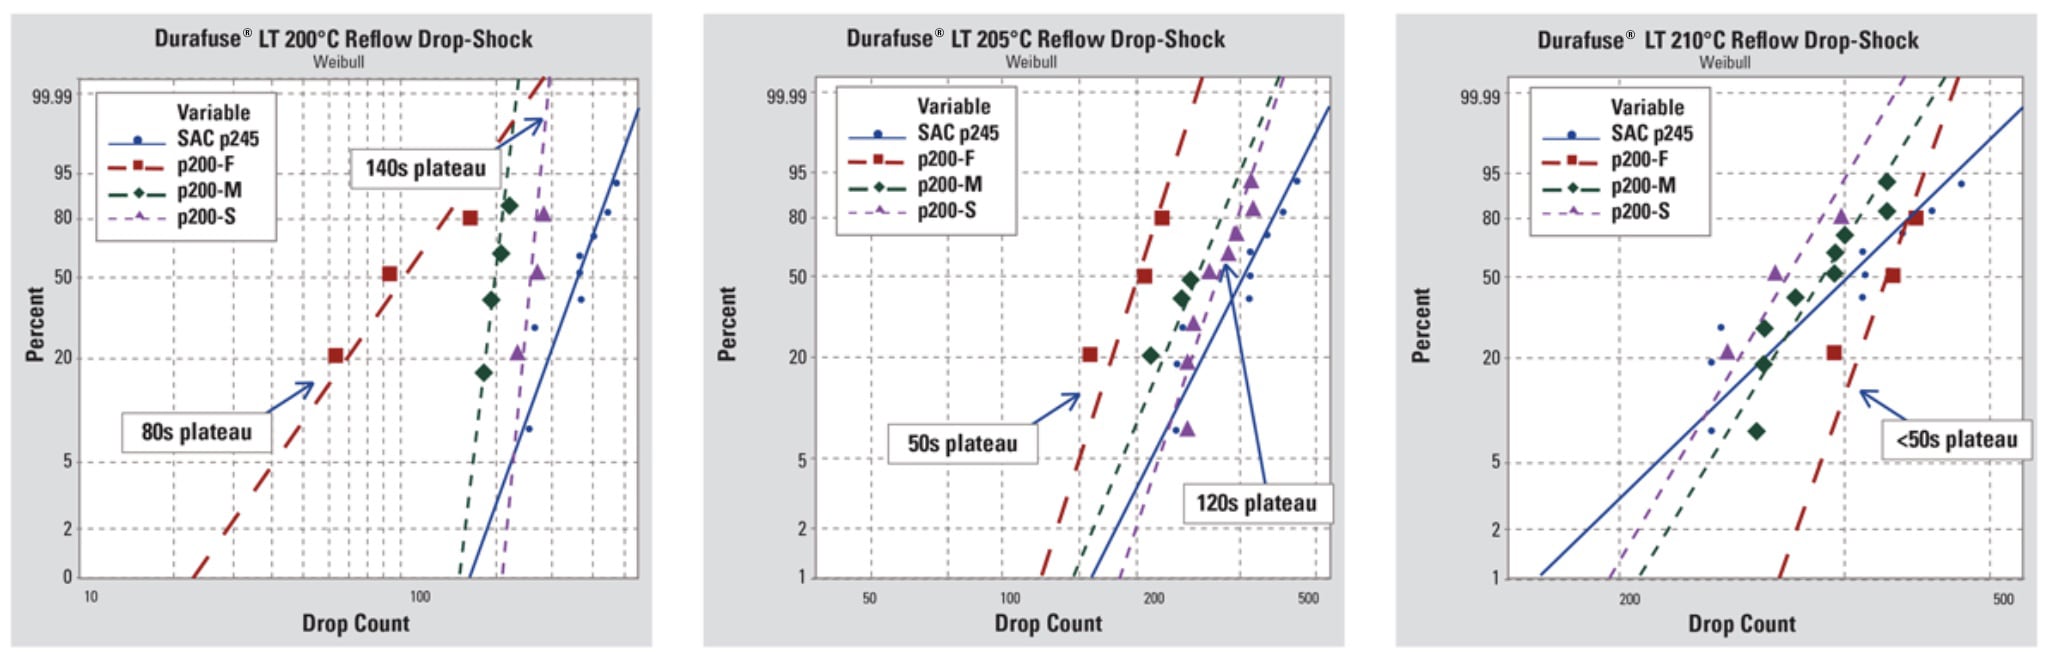 Fusion Time vs. Drop Shock Performance: Depending on peak temperature, time at peak can be used to optimize for drop-shock resilience.